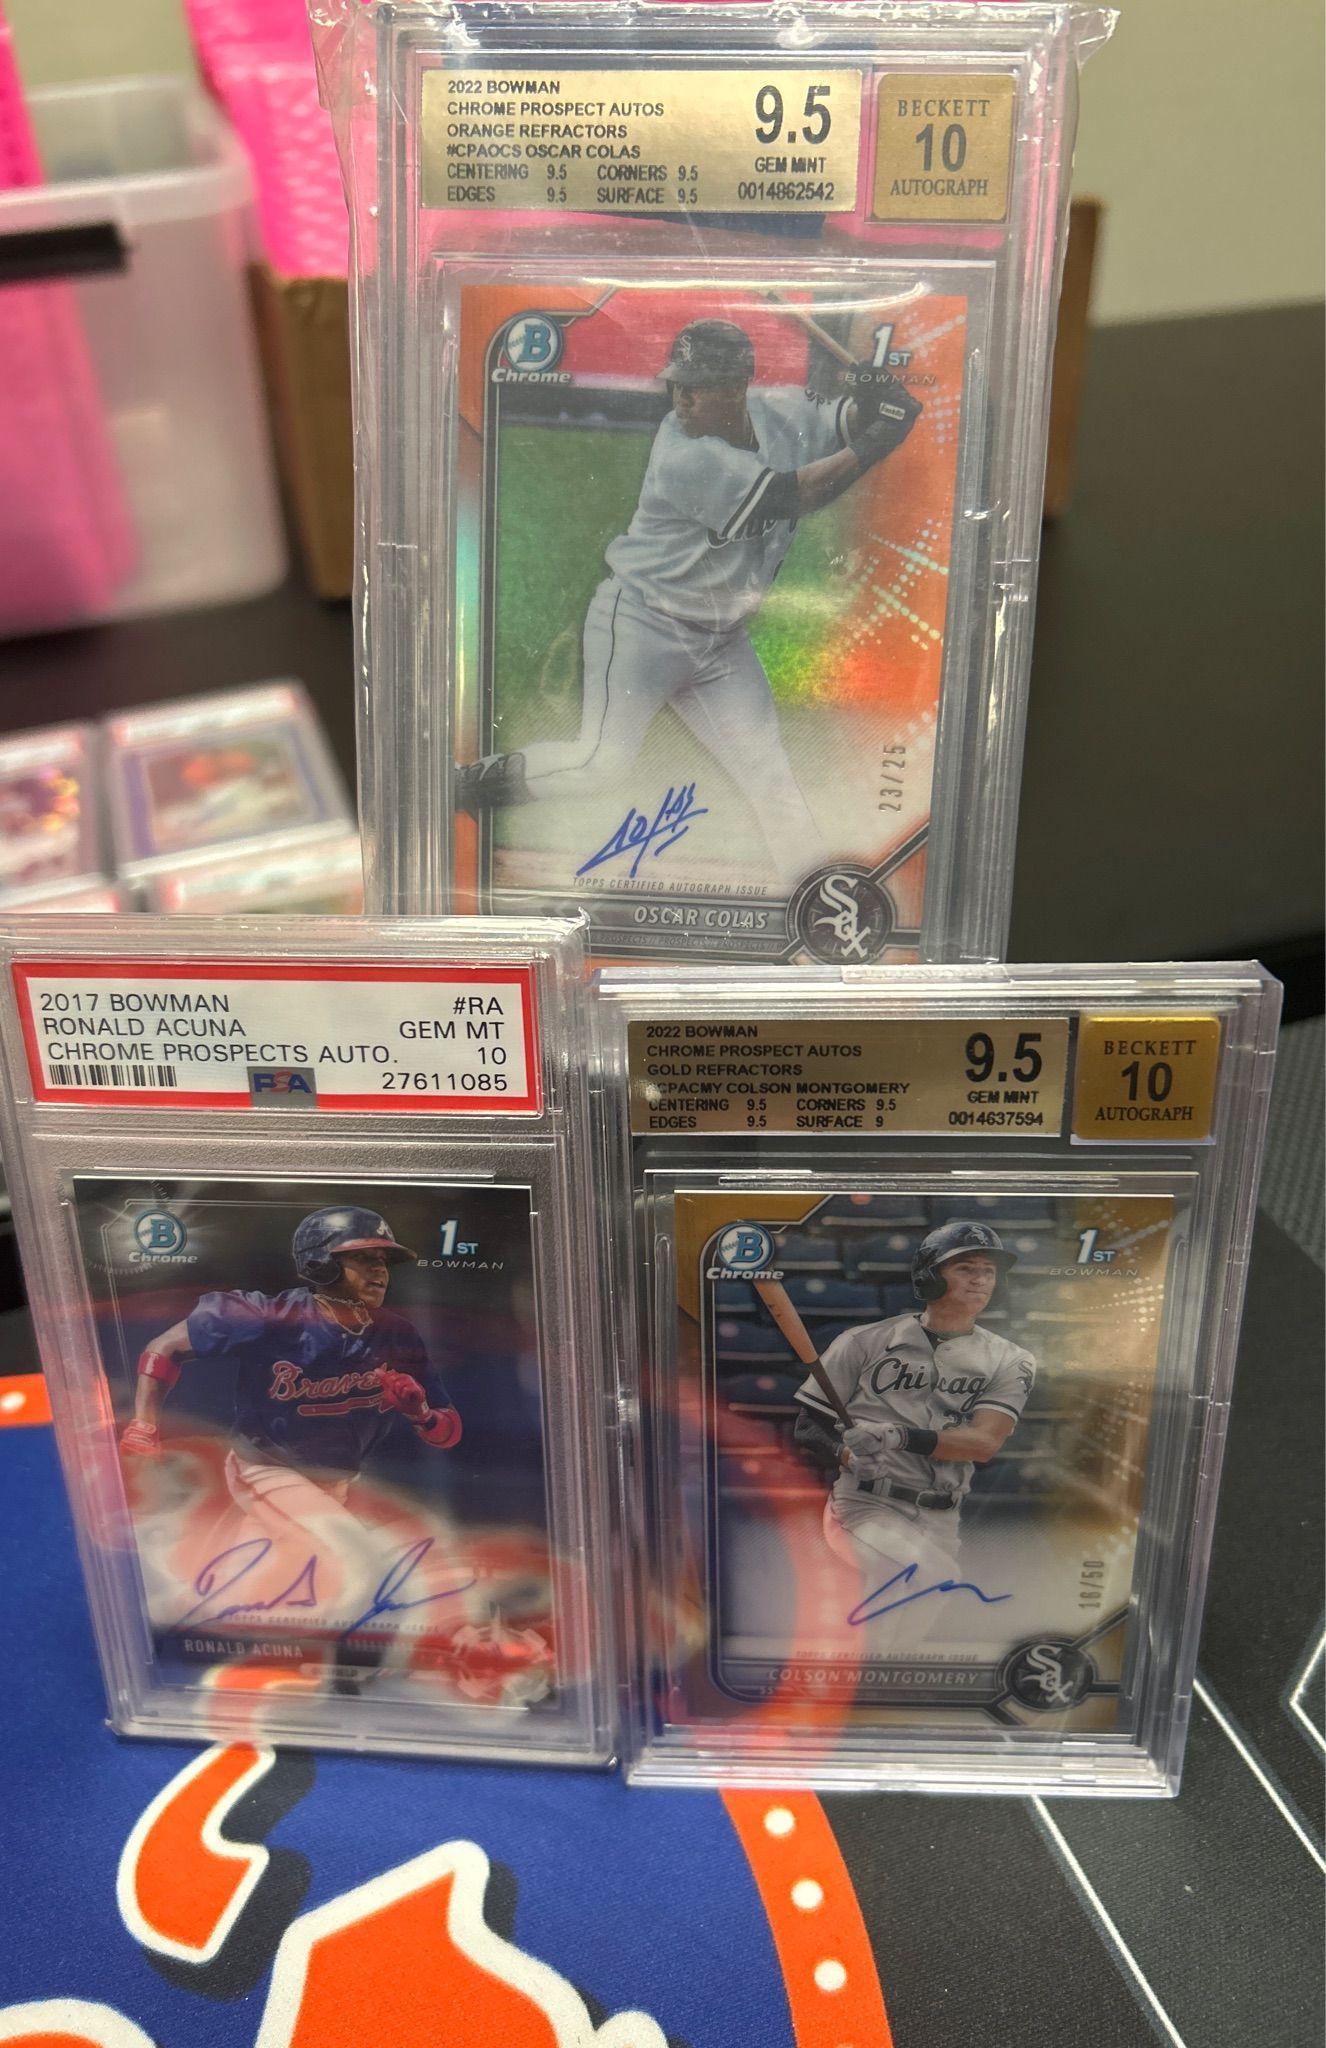 Whatnot BOWMAN GEE PACKS!!!! SUPER LOADED!!!! 8,000 CHASER